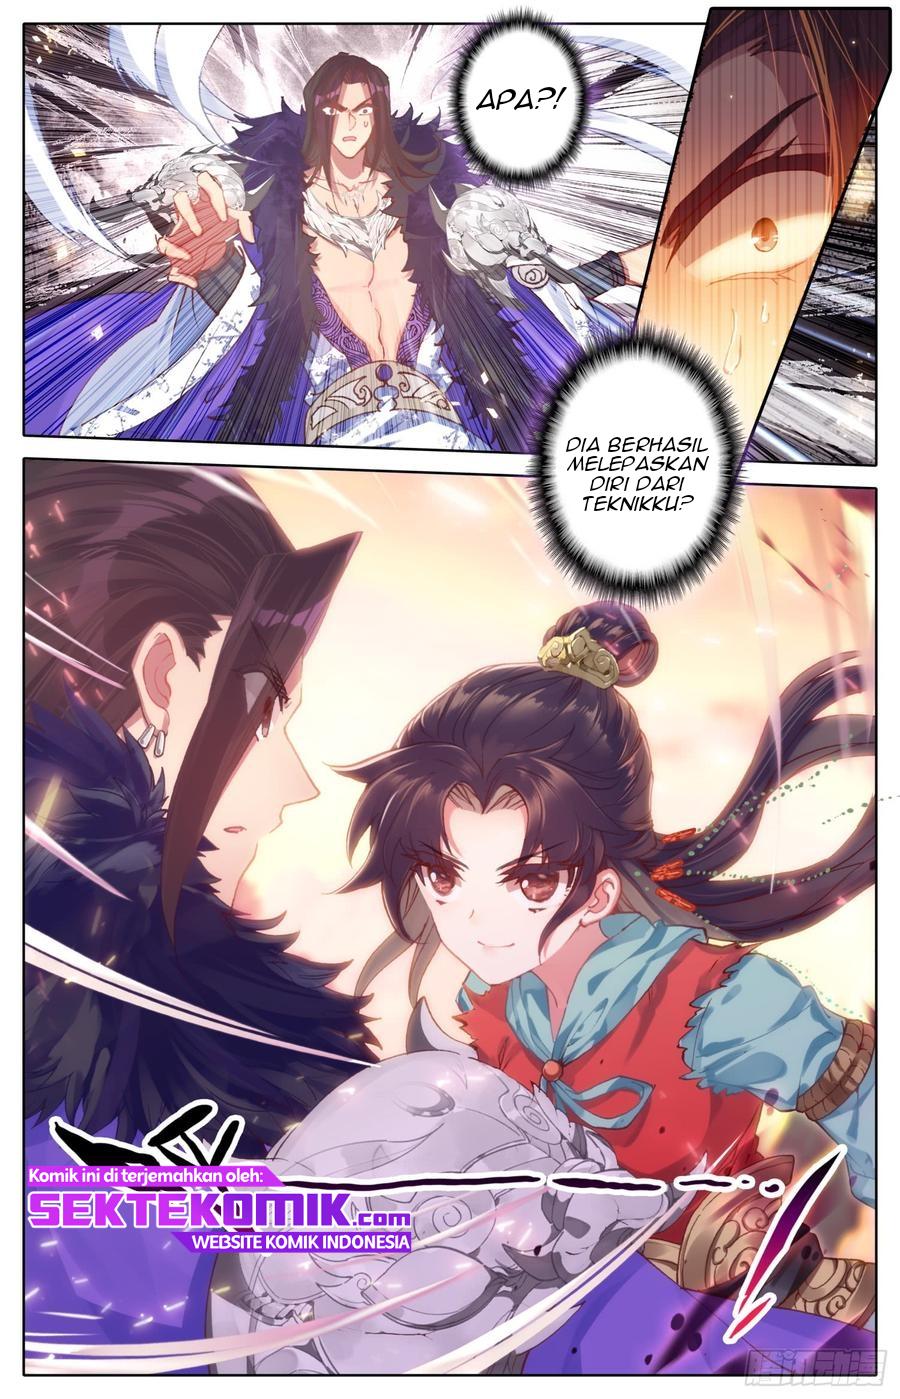 Legend of the Tyrant Empress Chapter 40